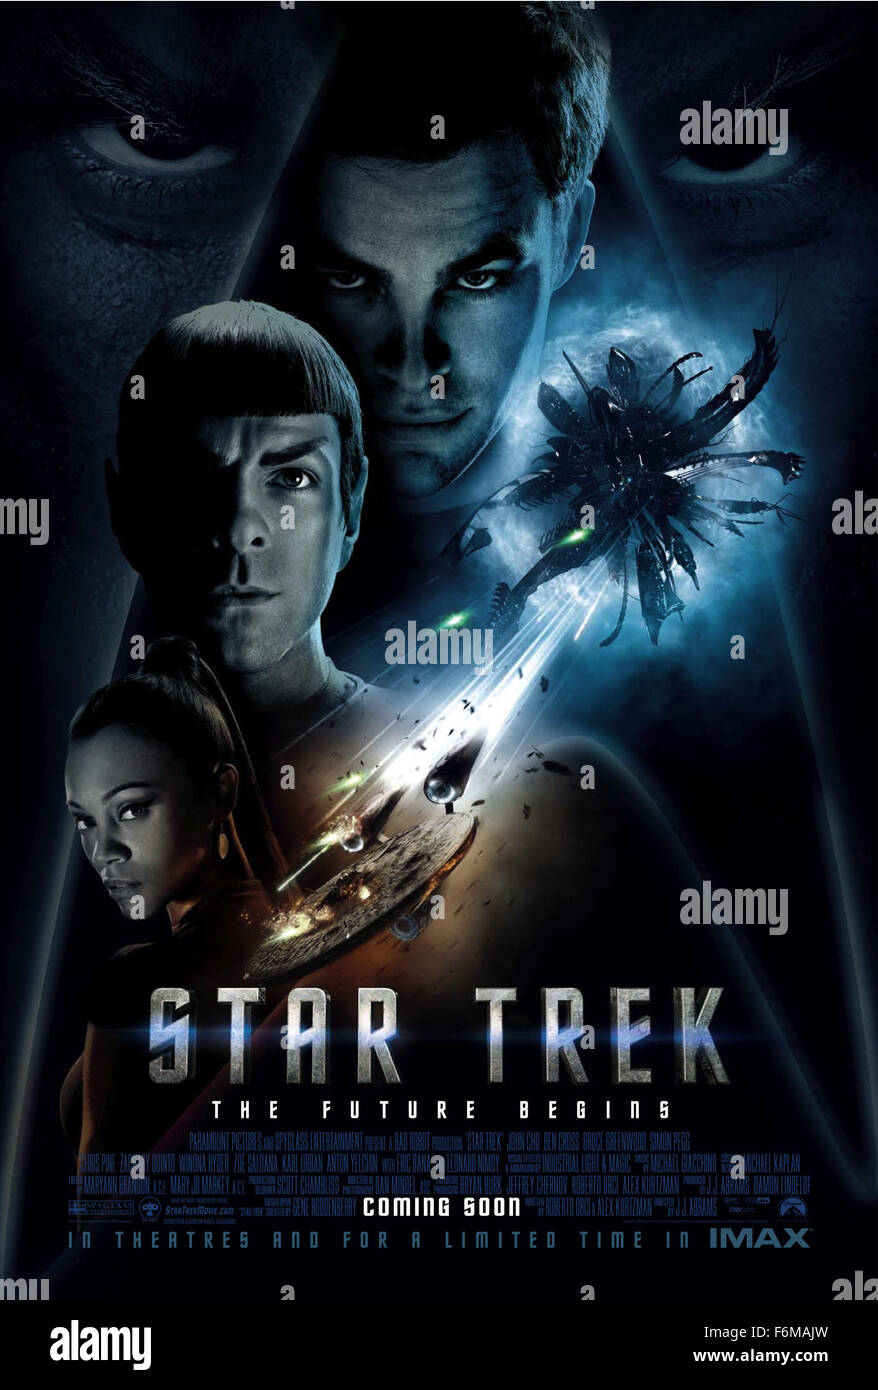 RELEASE DATE: May 8, 2009. MOVIE TITLE: Star Trek. STUDIO: Paramount Pictures. PLOT: A chronicle of the early days of James T. Kirk and his fellow USS Enterprise crew members. PICTURED: CHRIS PINE as James T. Kirk, ZACHARY QUINTO as Spock and ZOE SALDANA as Nyota Uhura. Stock Photo